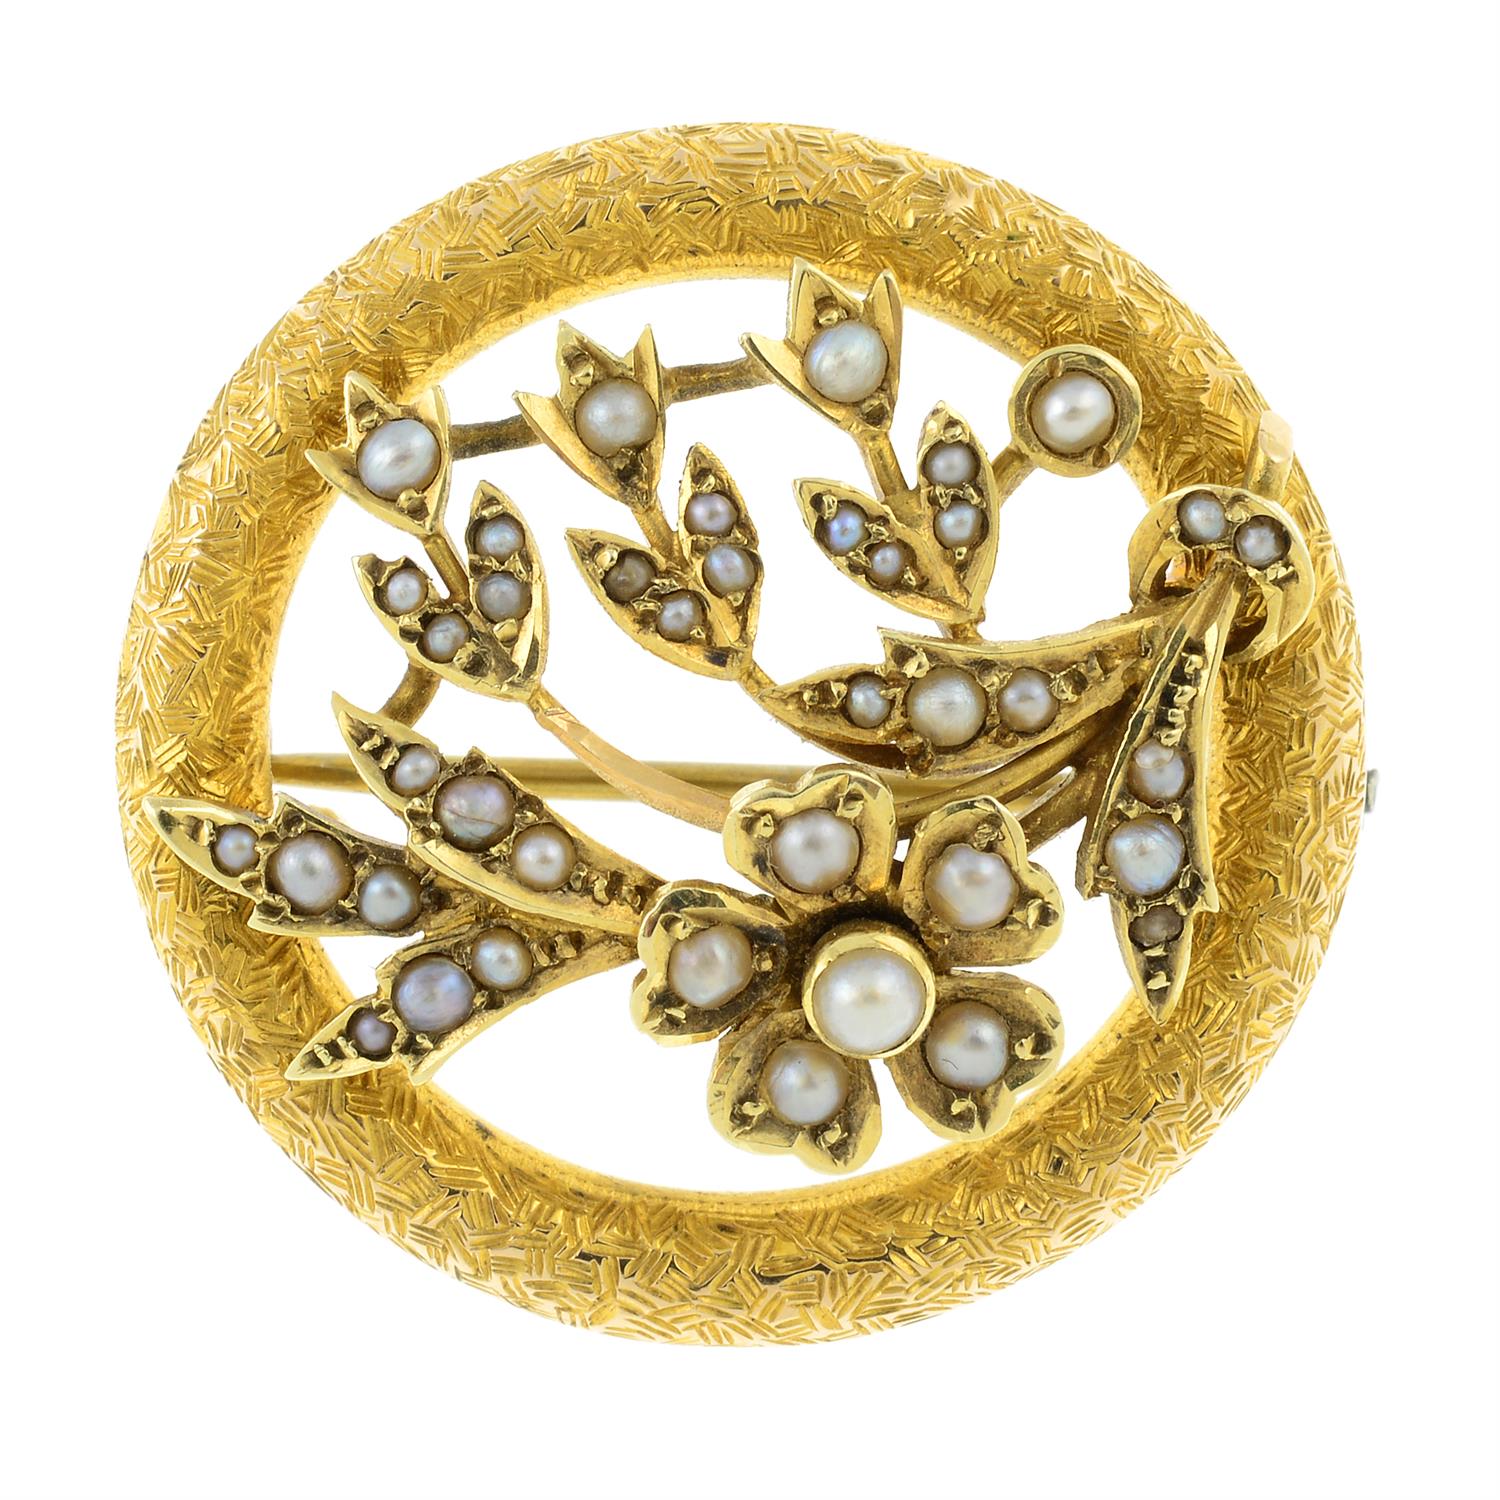 An early 20th century 15ct gold split pearl brooch, with floral motif.